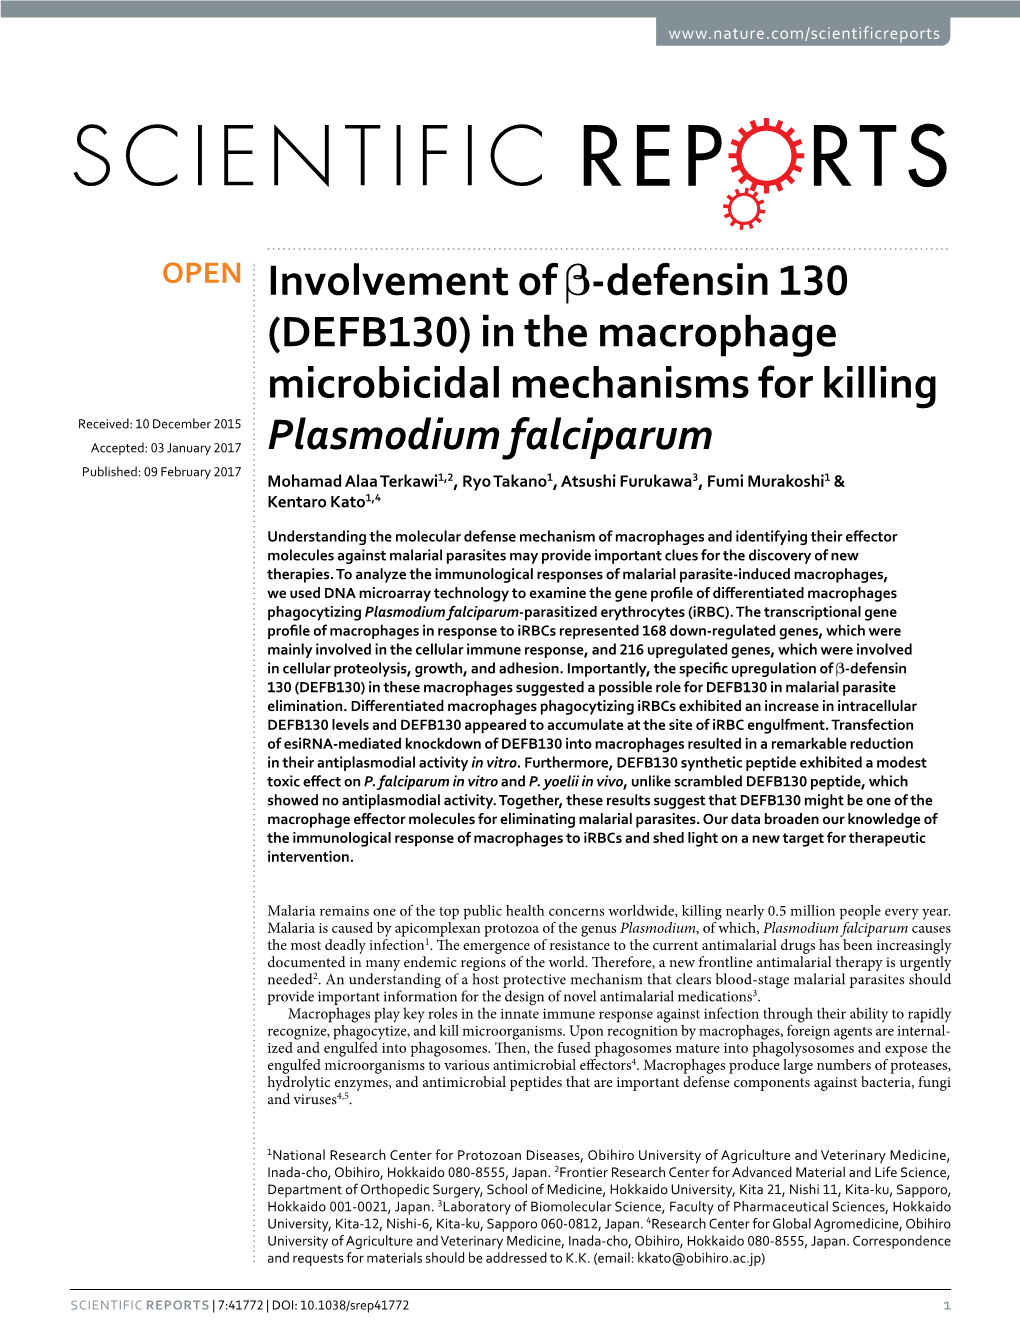 Involvement of Β-Defensin 130 (DEFB130) in the Macrophage